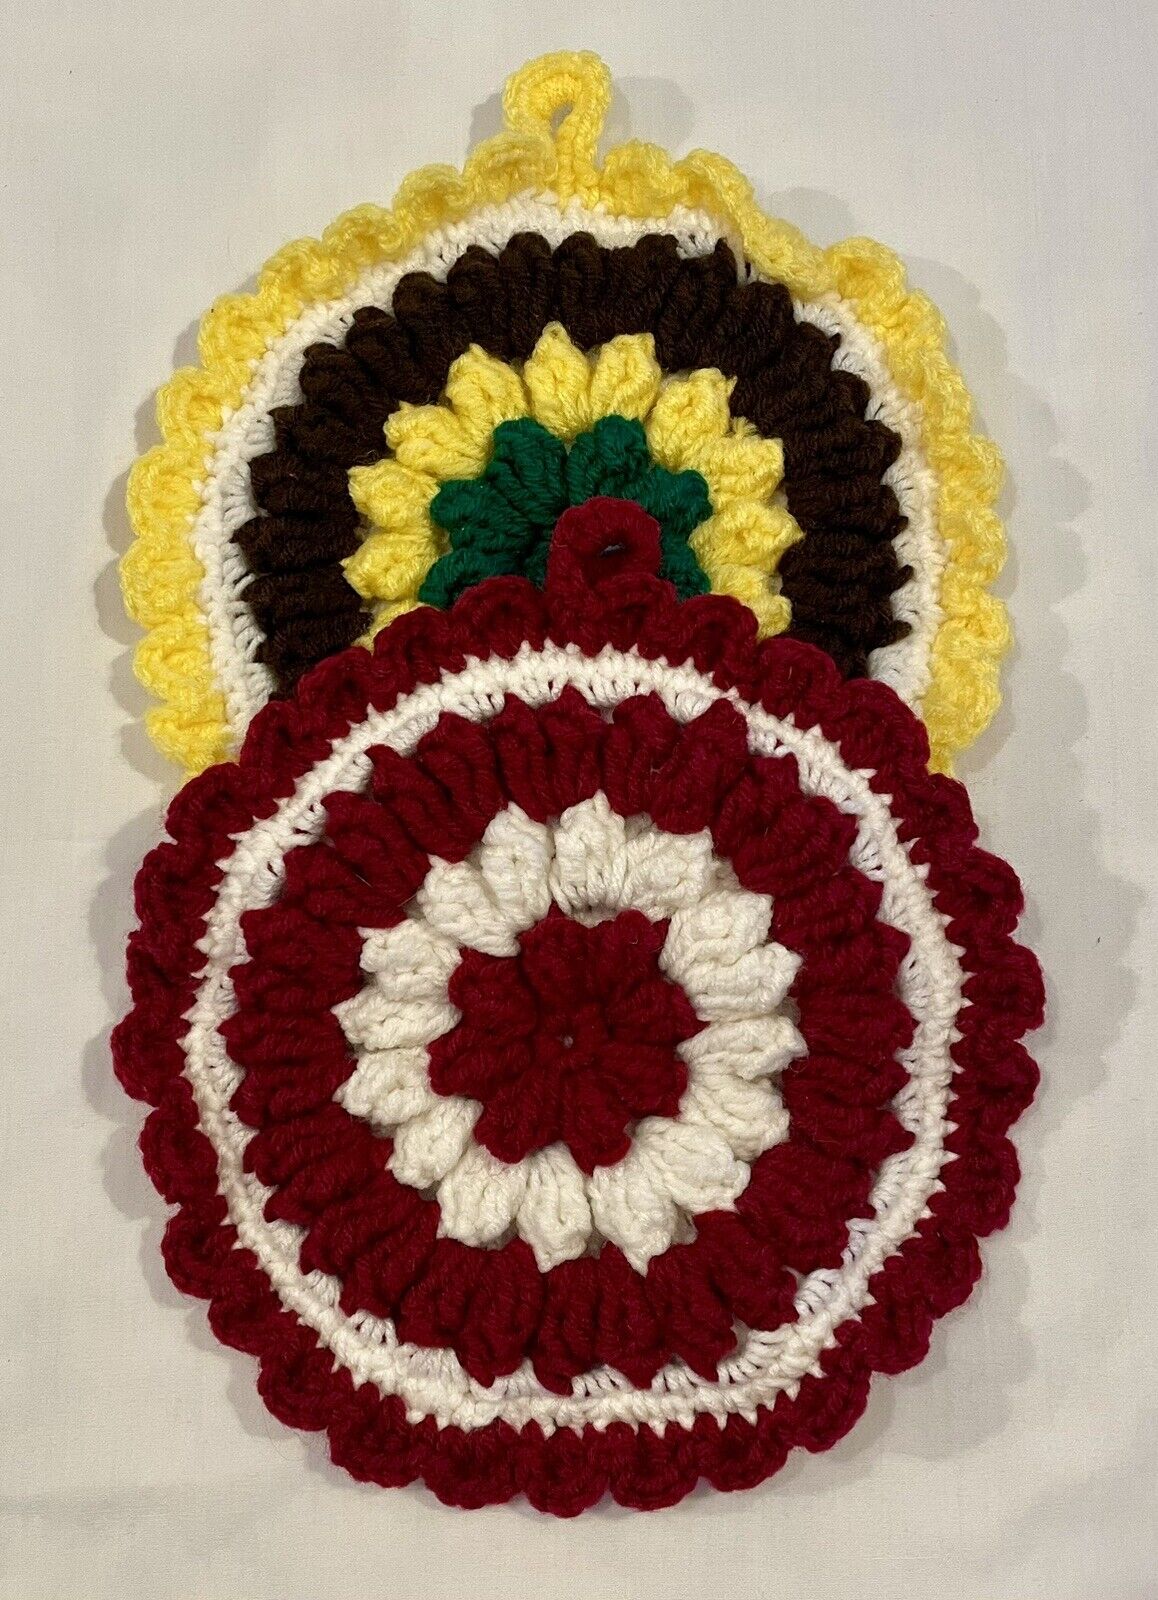 Lot of 2 Vintage Knit Crocheted Pot Holders  Hot Pad Homemade Multicolor